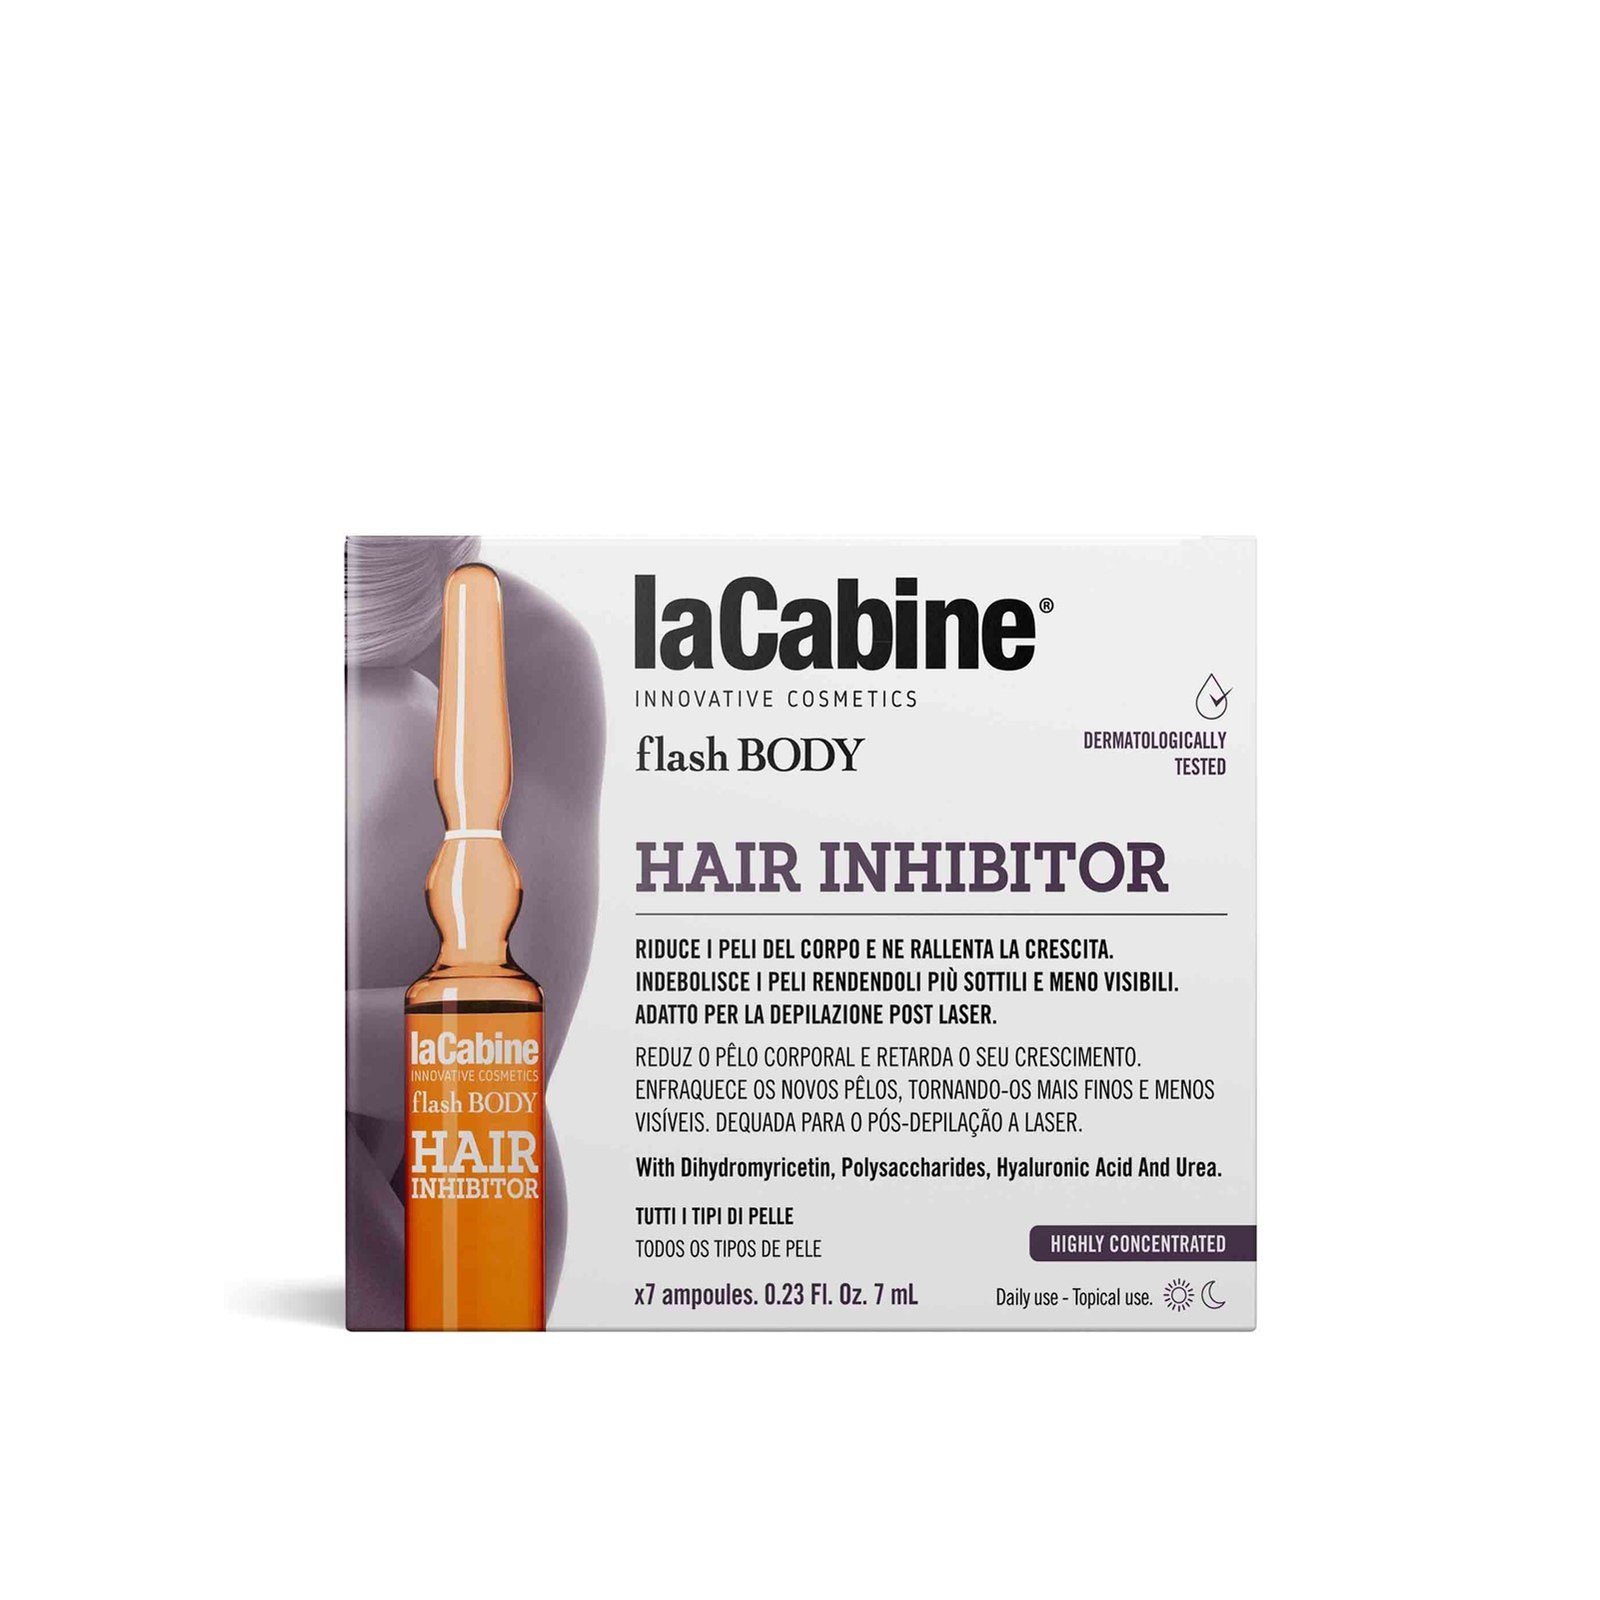 La Cabine Flash Body Hair Inhibitor Concentrated Ampoules 7x7ml (0.23 fl oz)